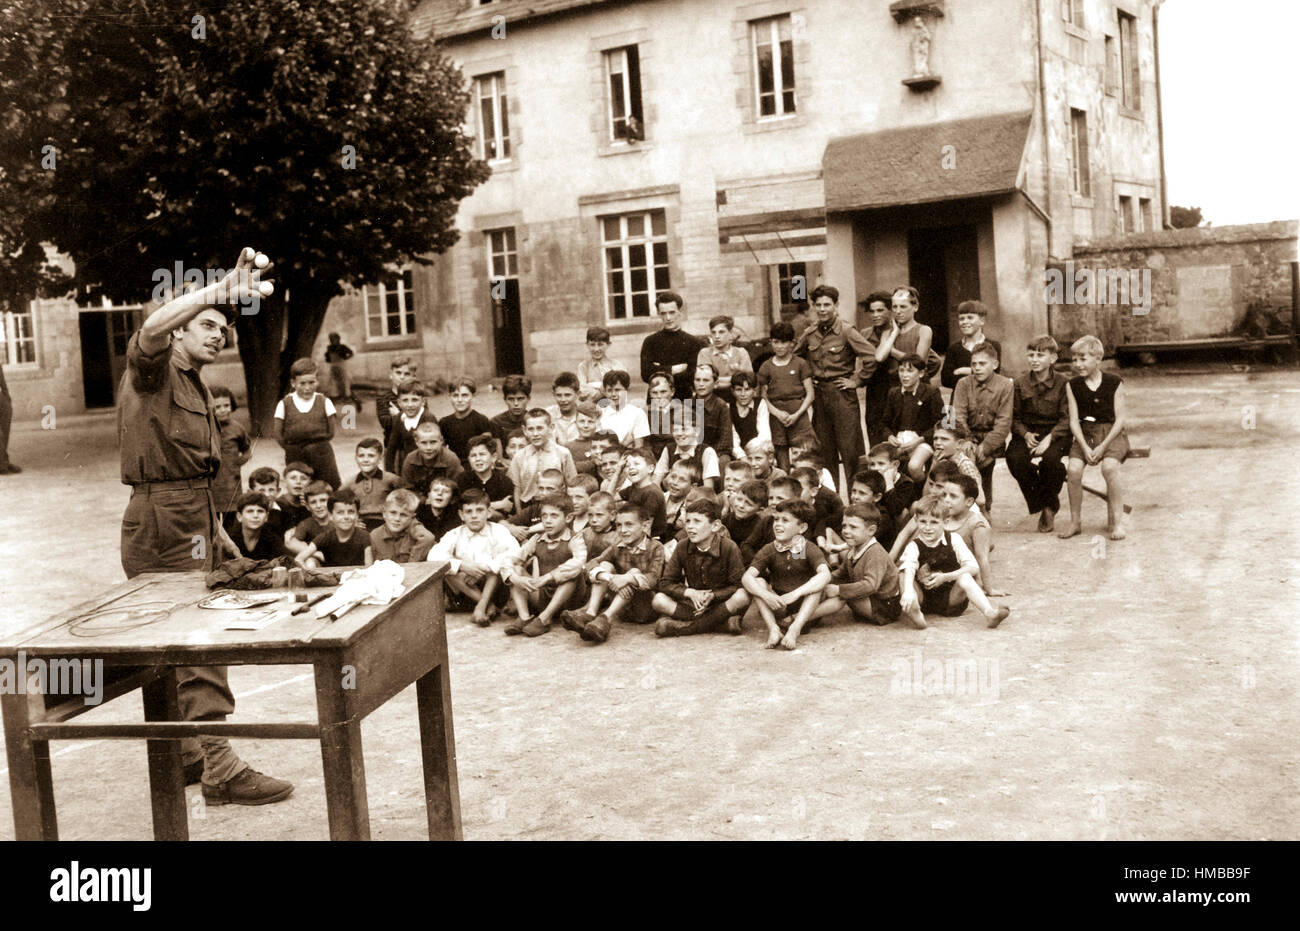 Cpl. Paul Operer, New York City, amuses a group of French children who have taken refuge at a church near Plaennec, in the Brest area, France.  His GI prestidigitations amused the children and took their minds off their troubles.  August 20, 1944. Hall. (Army) Exact Date Shot Unknown NARA FILE #:  111-SC-193132 WAR & CONFLICT BOOK #:  1257 Stock Photo